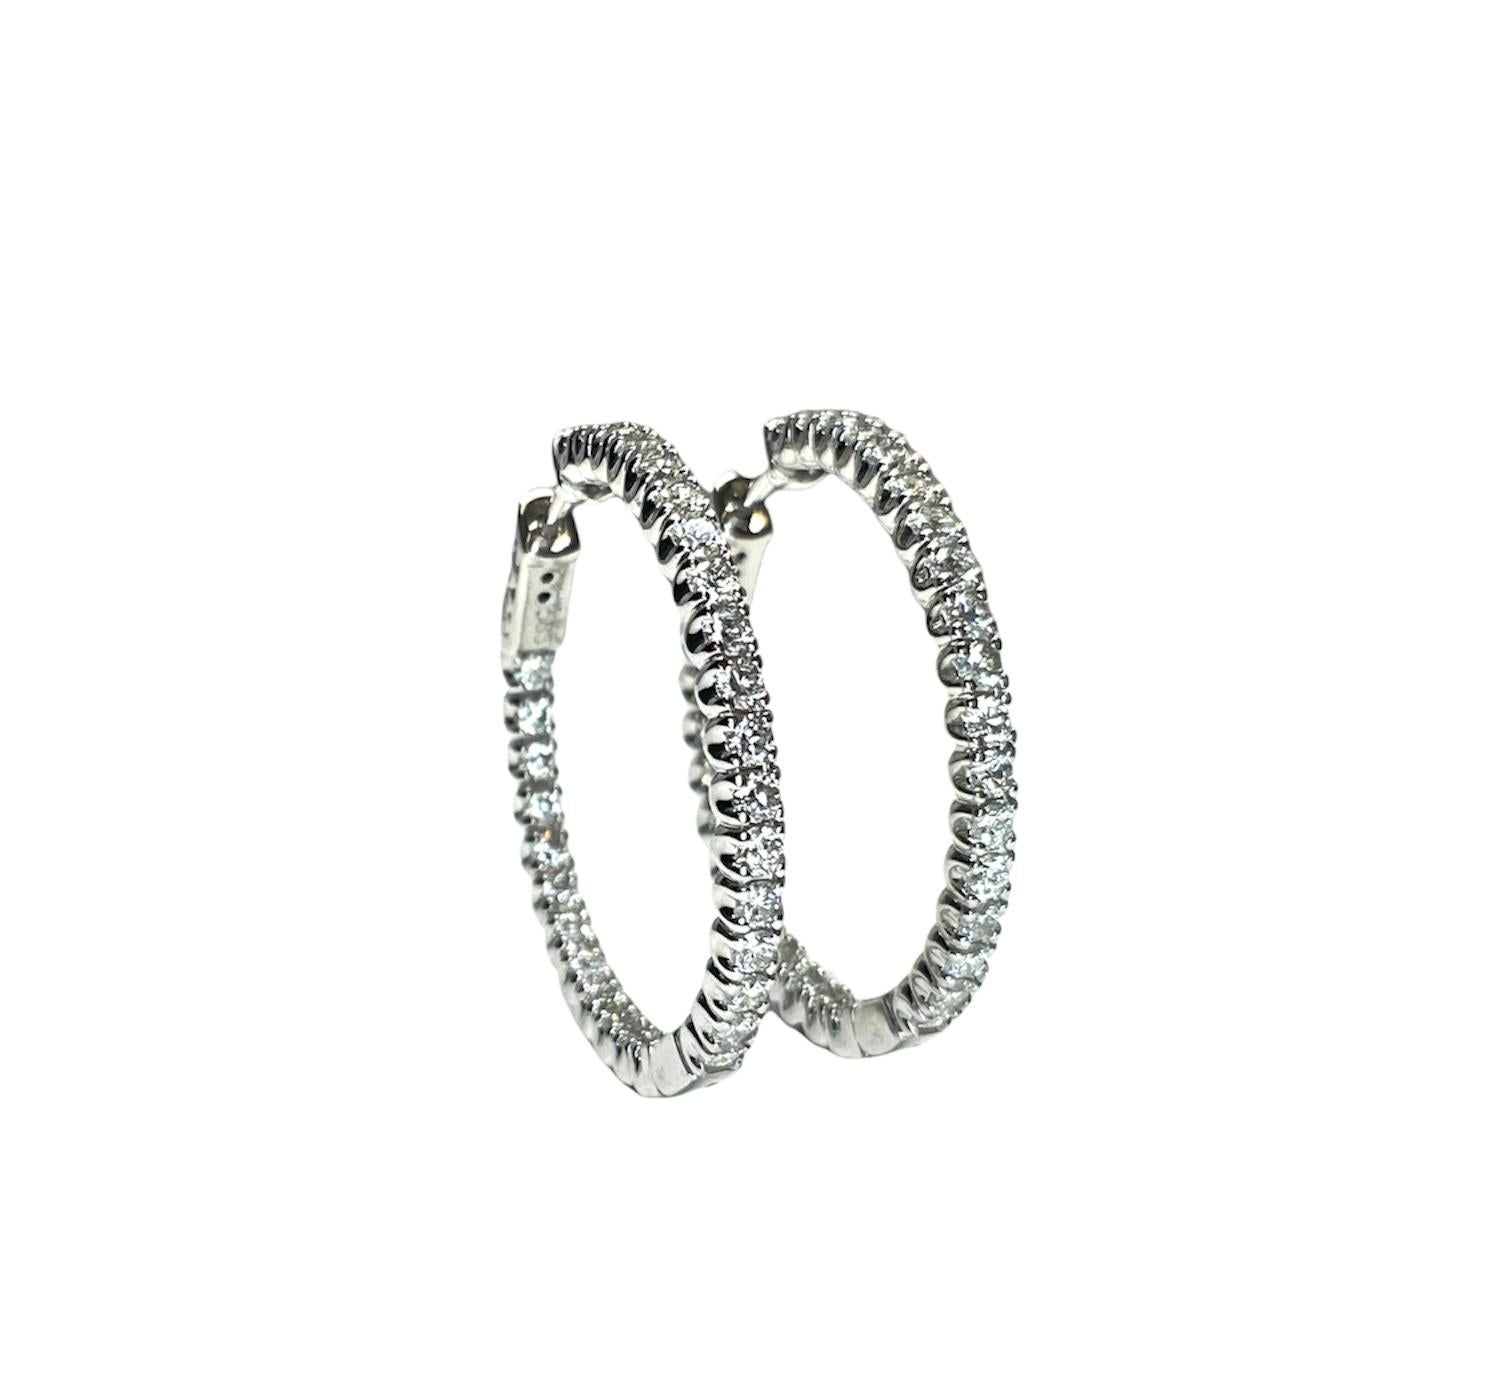 14k white gold diamond in and out hoop earrings feature 58 diamonds weighing 3.31 cts graded F-G, VS2-SI1 set in 14k white gold.